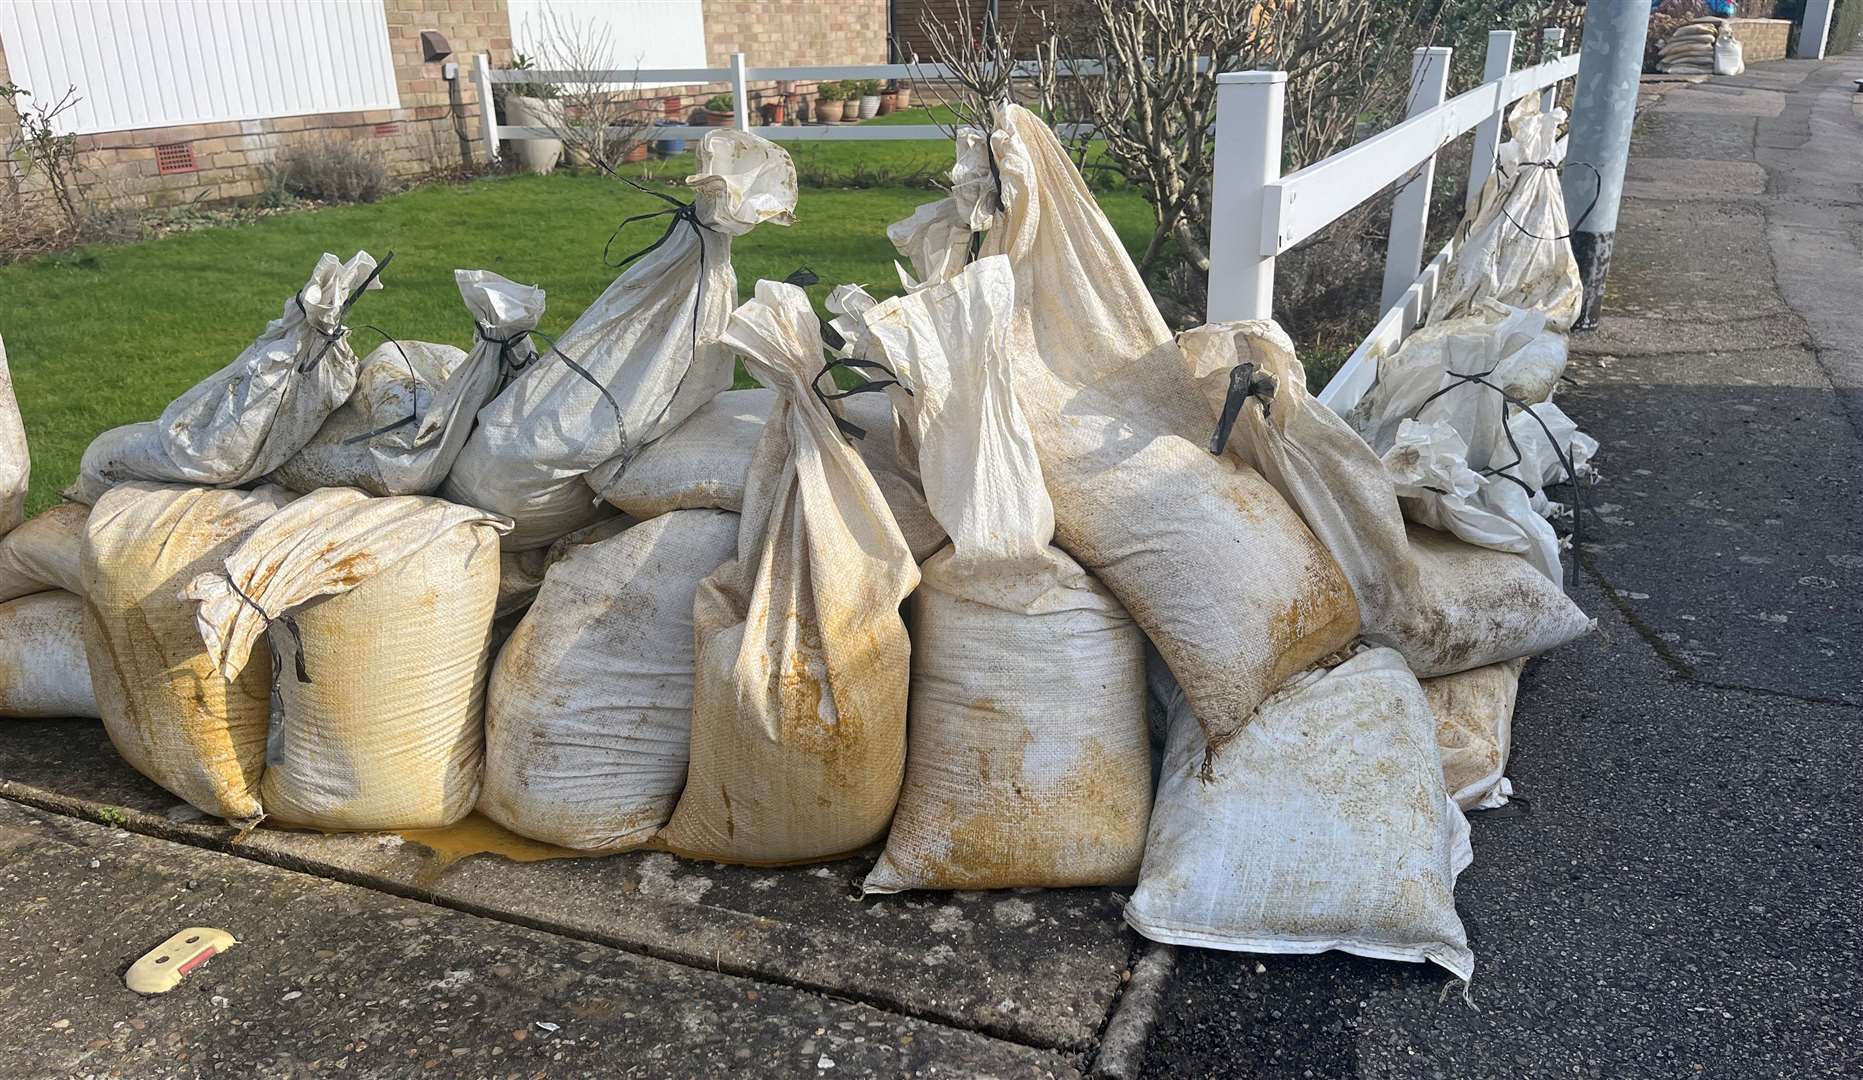 Sandbags were delivered to Romney Way by maintenance officers at Folkestone and Hythe District Council